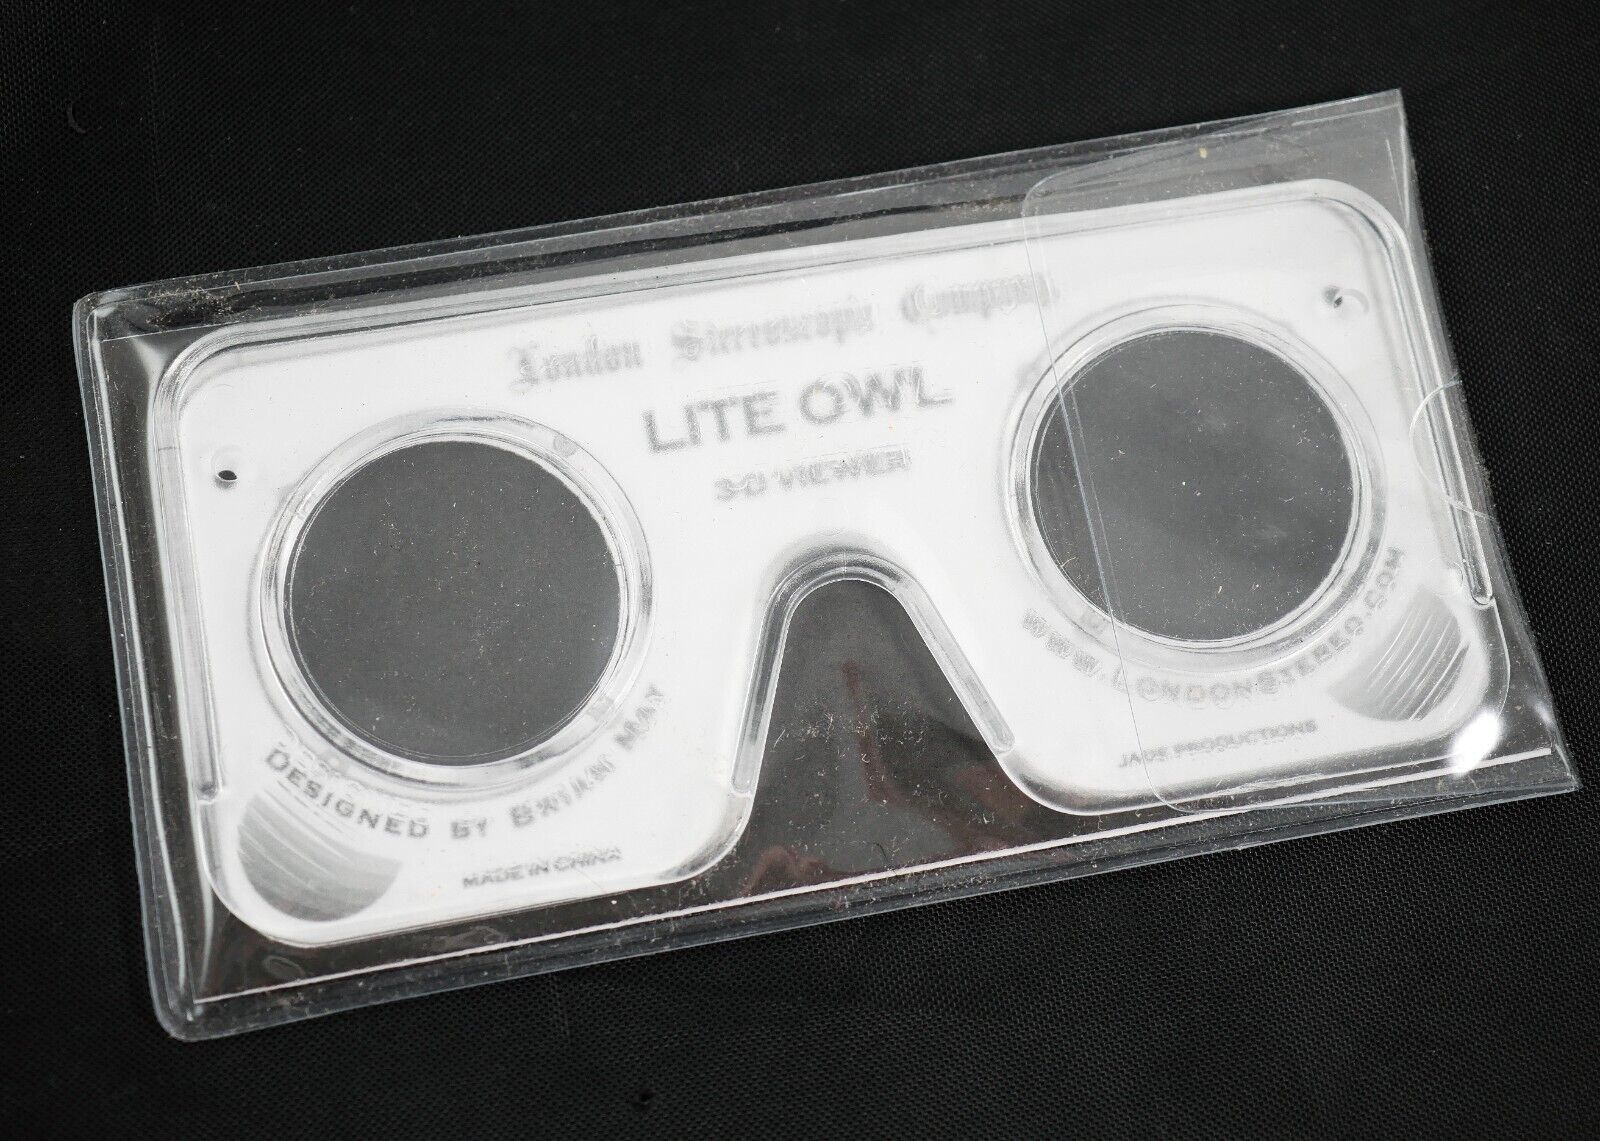 Lite OWL Stereoscope 3D print viewer by Brian May